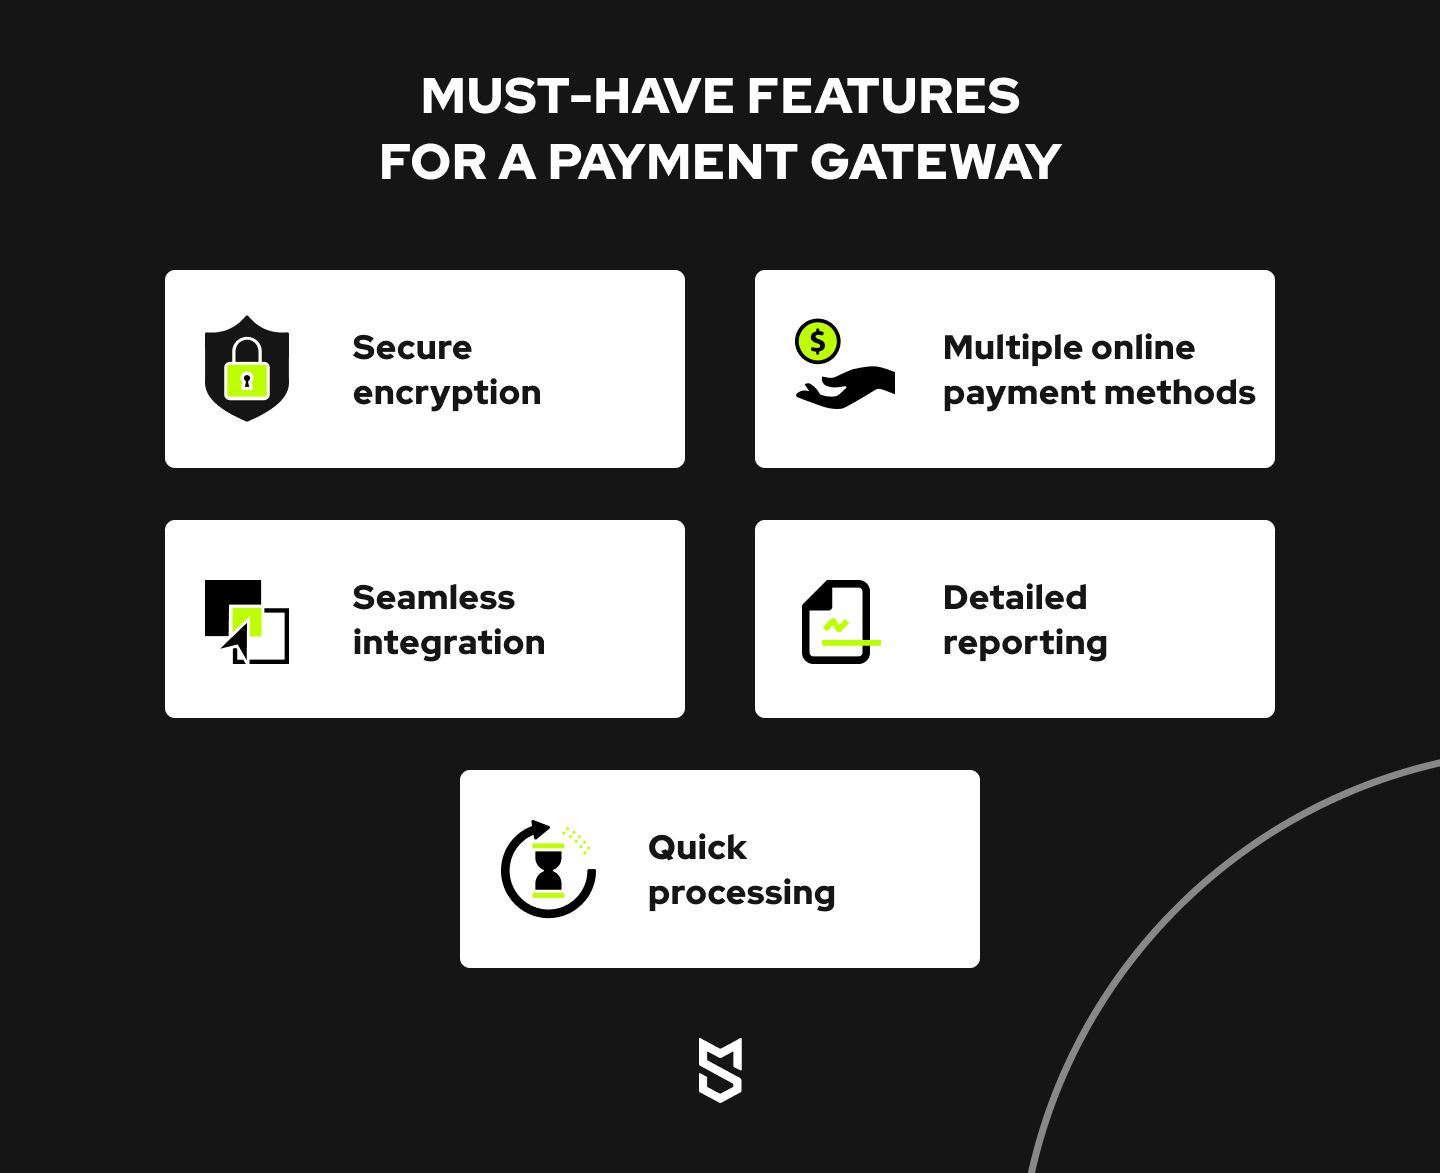 5 must-have features for a payment gateway